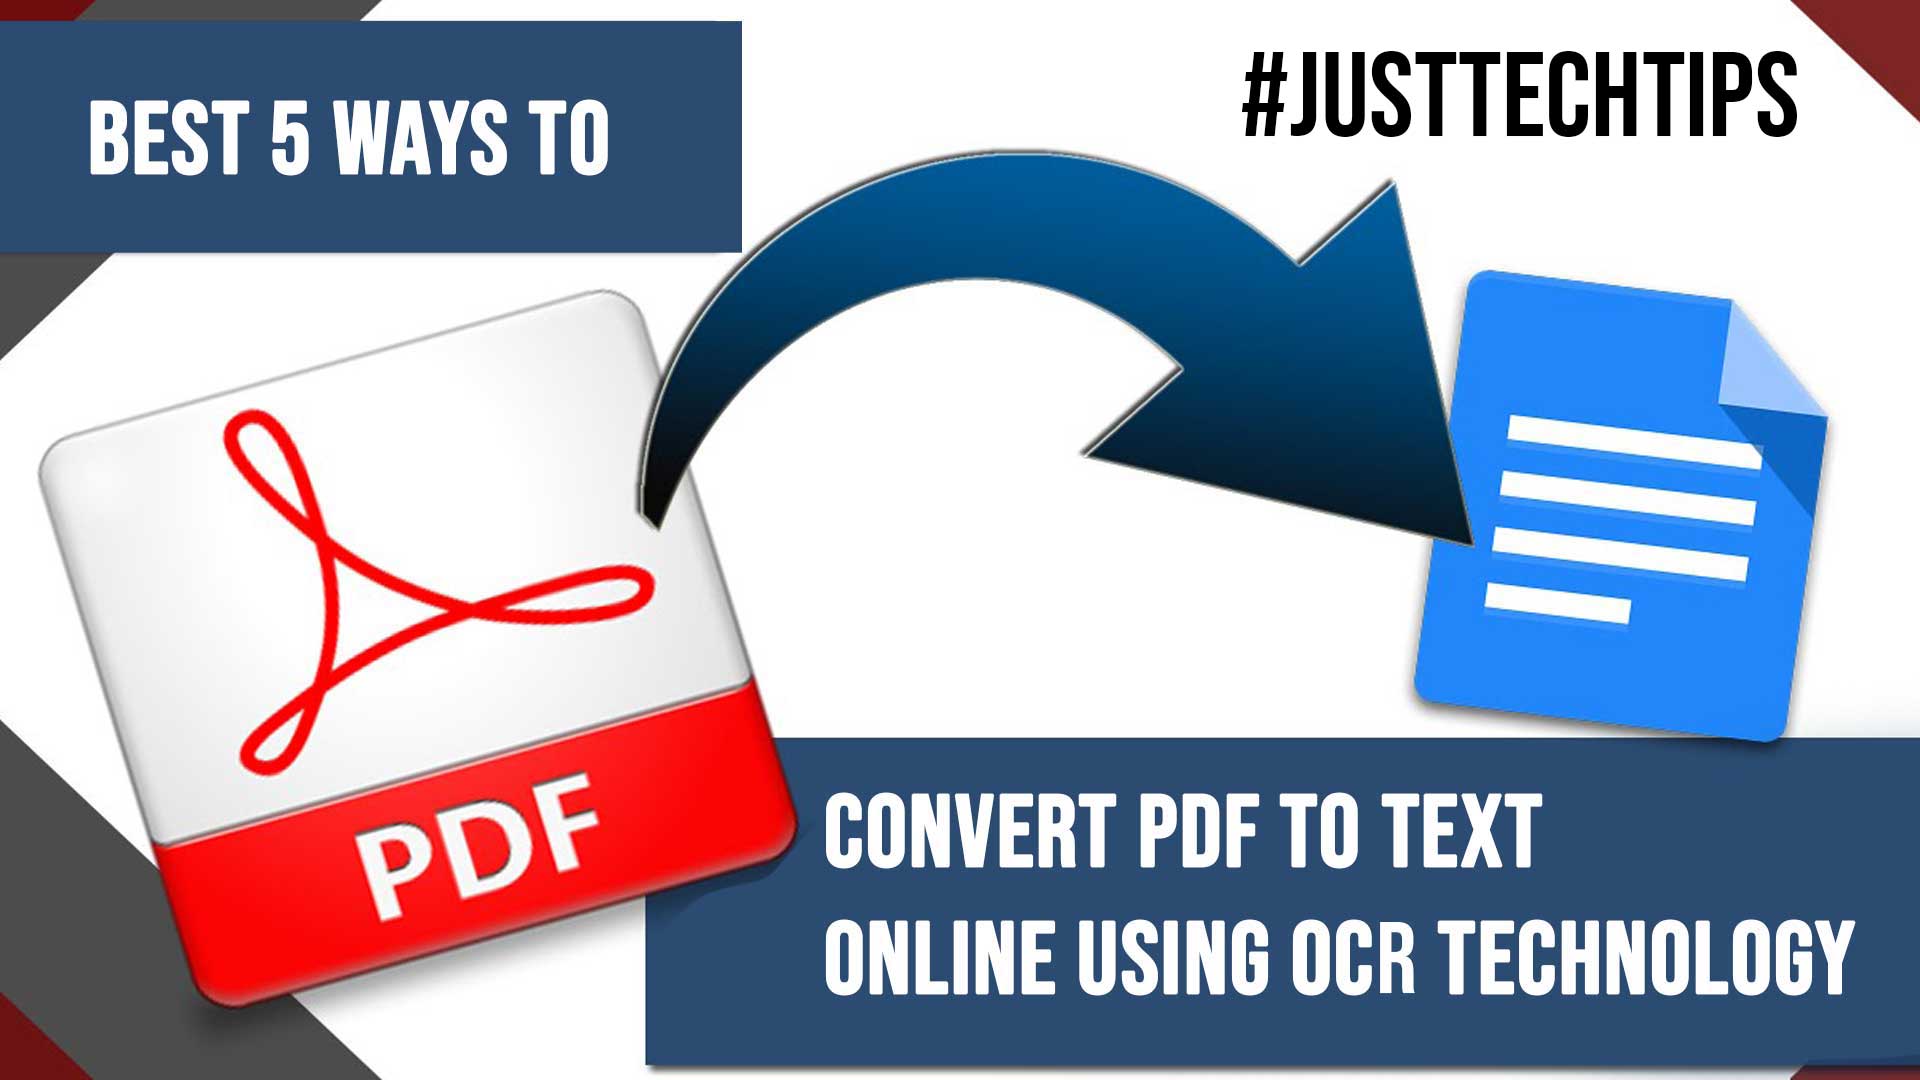 Best 5 Ways To Convert PDF To Text Online Using OCR Technology